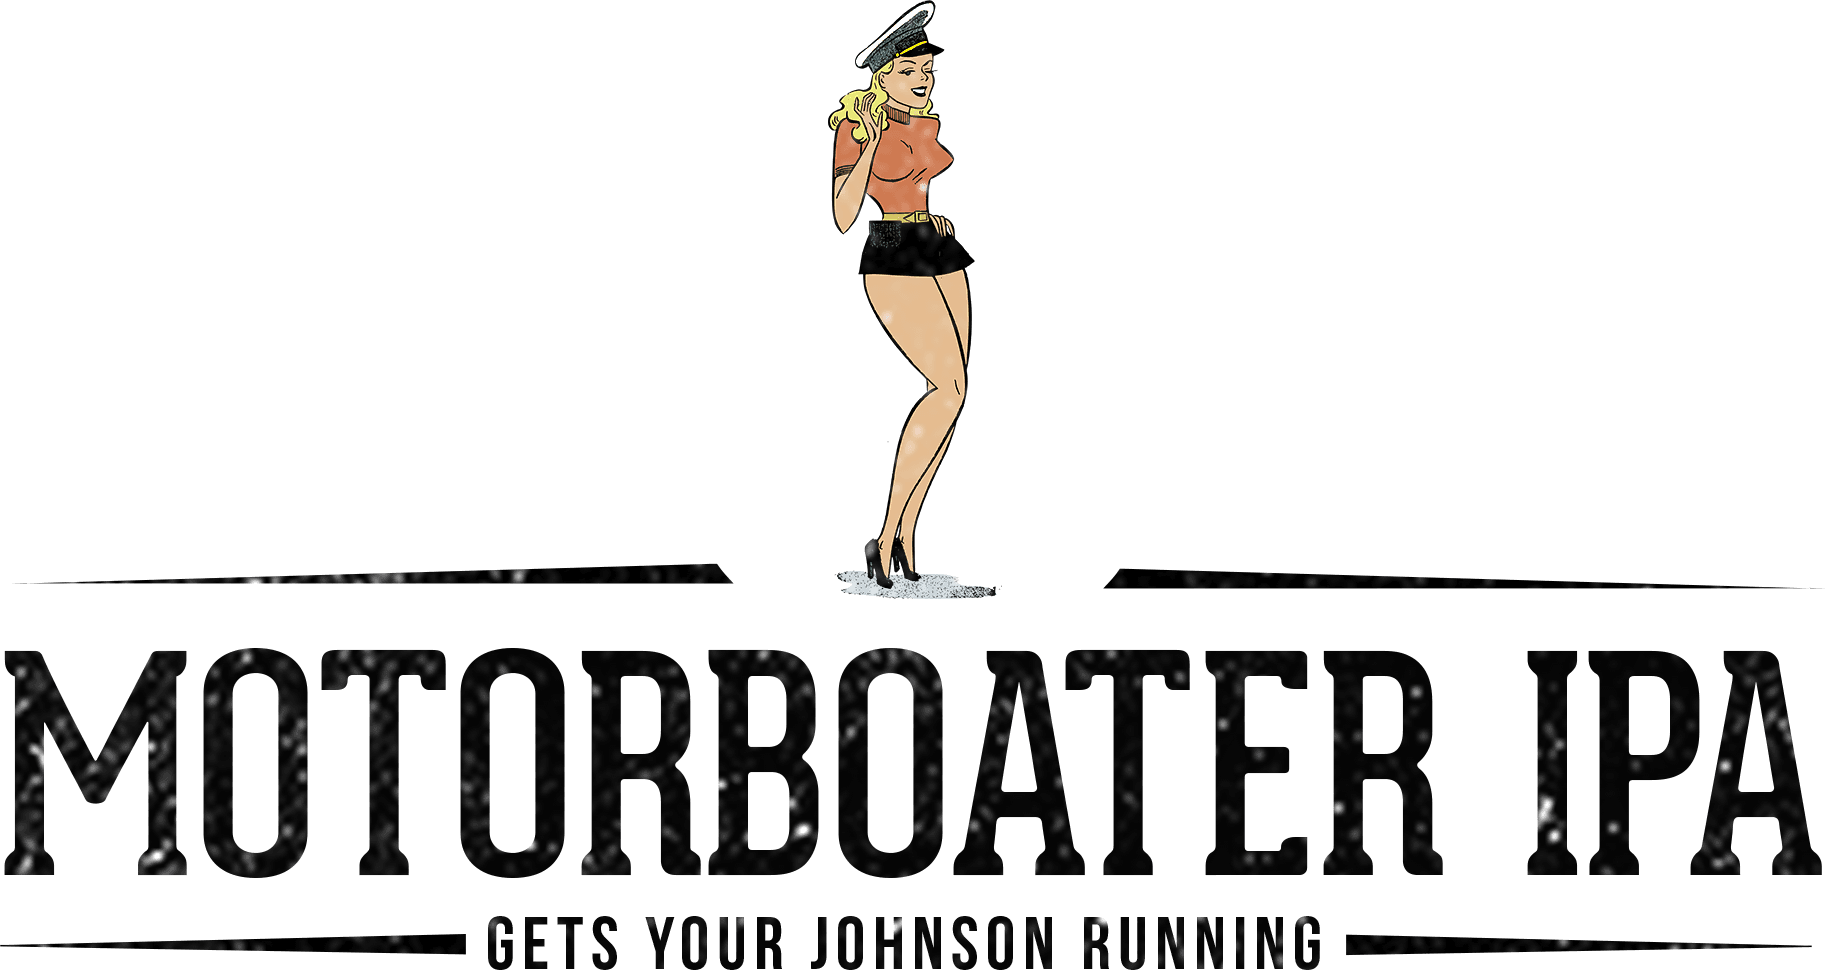 Motorboater IPA